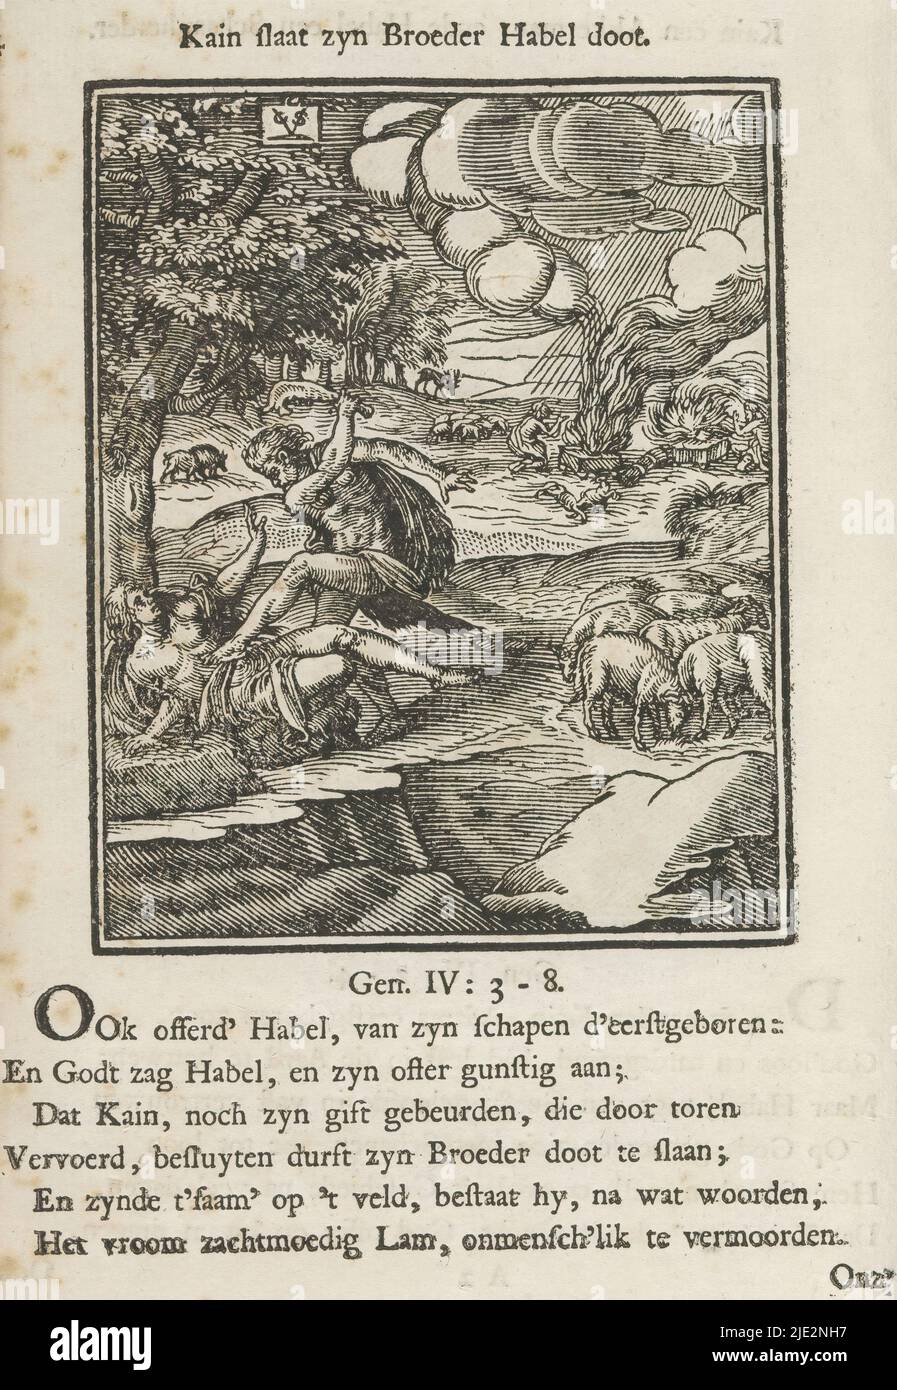 Cain kills Abel, Kain beats zyn brother Habel doot (title on object), Under a tree, Cain beats his brother Abel to death with a jawbone. In the background right the sacrifices of Cain and Abel. Above the scene is a title. Below, six verses and a reference to Genesis 4: 3-8. The print is part of an album., print maker: Christoffel van Sichem (II), (mentioned on object), print maker: Christoffel van Sichem (III), (mentioned on object), publisher: Jan Klooster, Amsterdam, c. 1645 and/or 1740, paper, letterpress printing, height 113 mm × width 90 mm, height 171 mm × width 132 mm Stock Photo